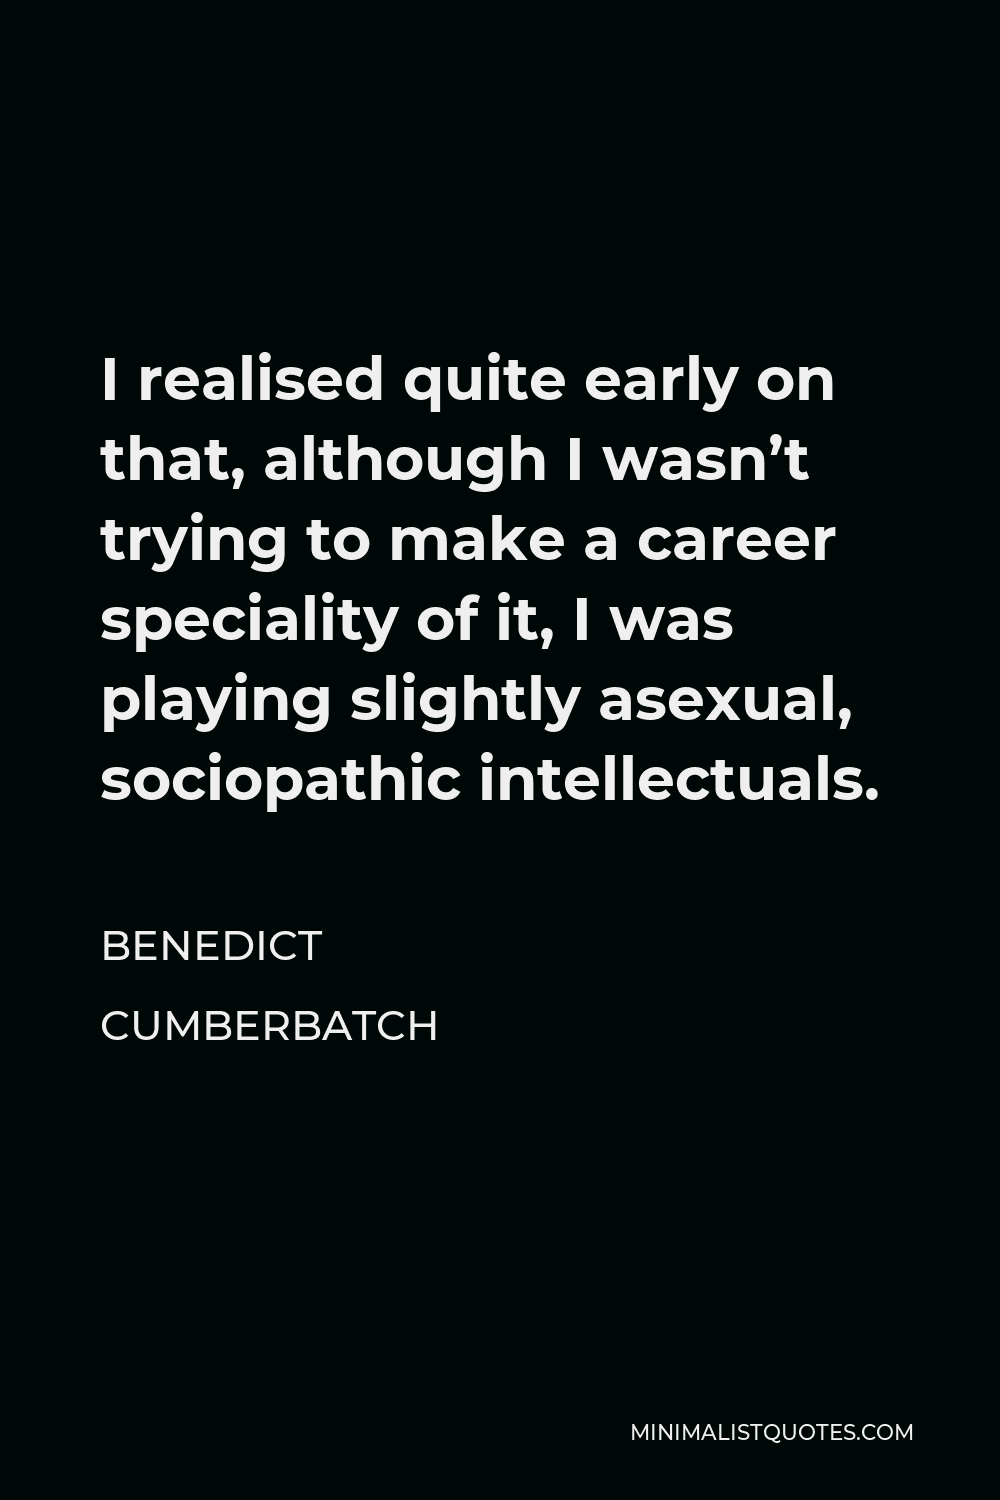 Benedict Cumberbatch Quote - I realised quite early on that, although I wasn’t trying to make a career speciality of it, I was playing slightly asexual, sociopathic intellectuals.